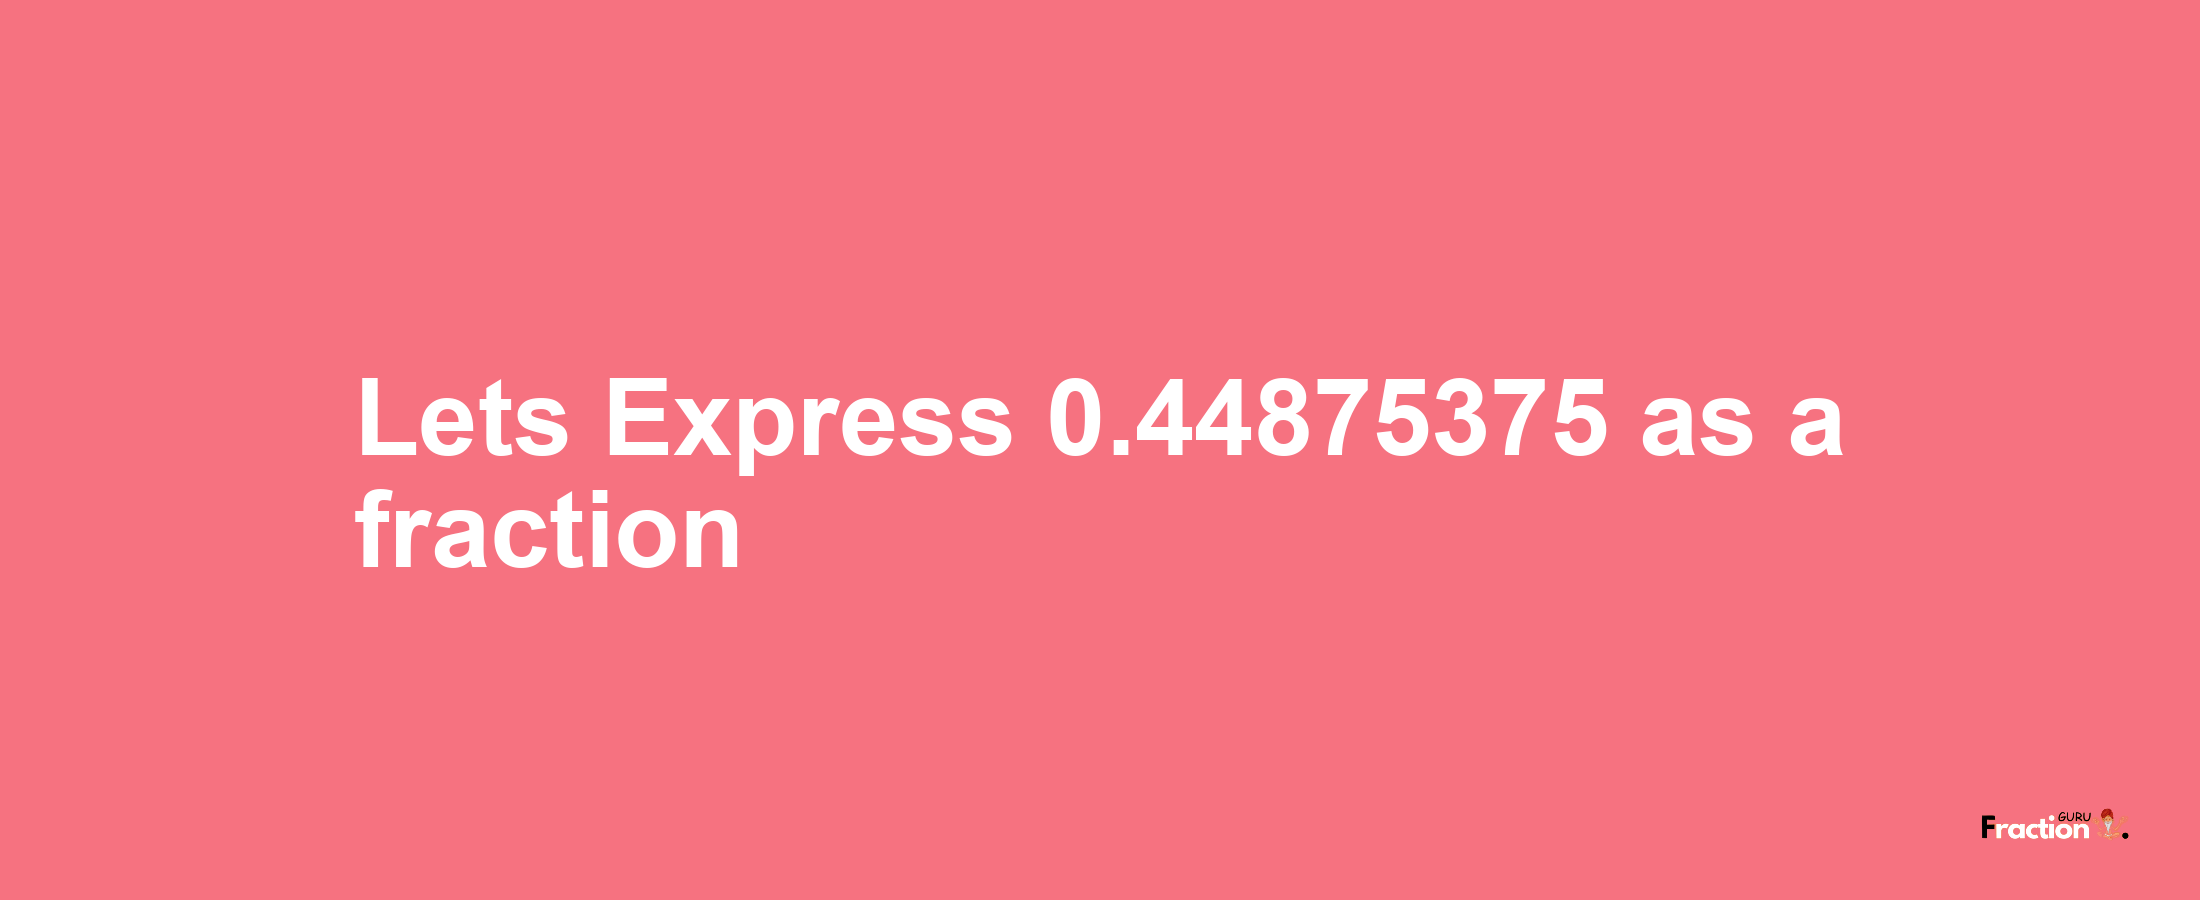 Lets Express 0.44875375 as afraction